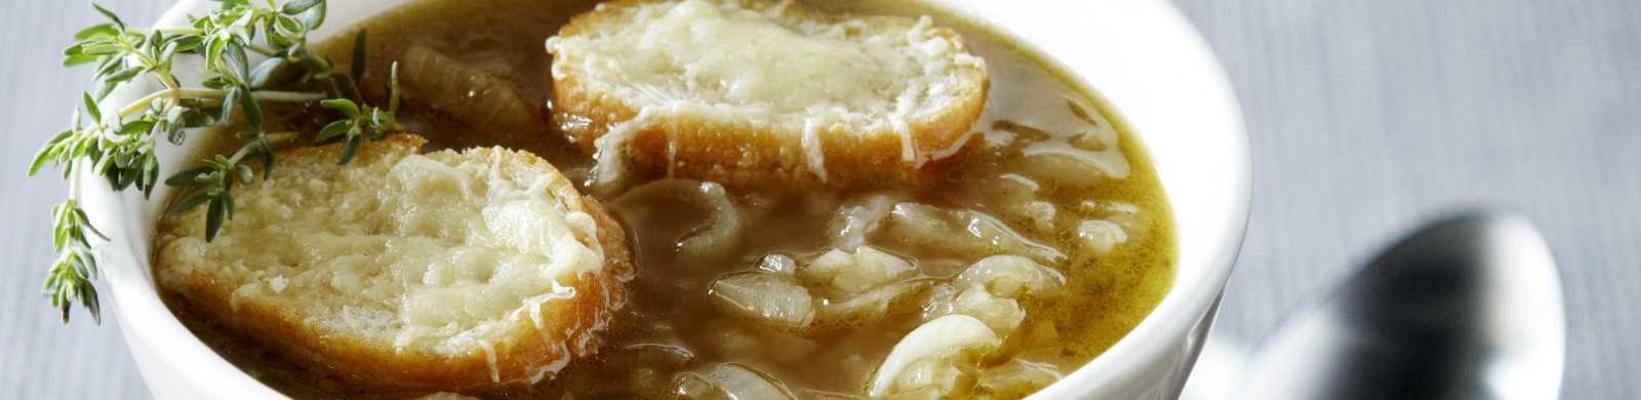 onion soup with cheese croutons